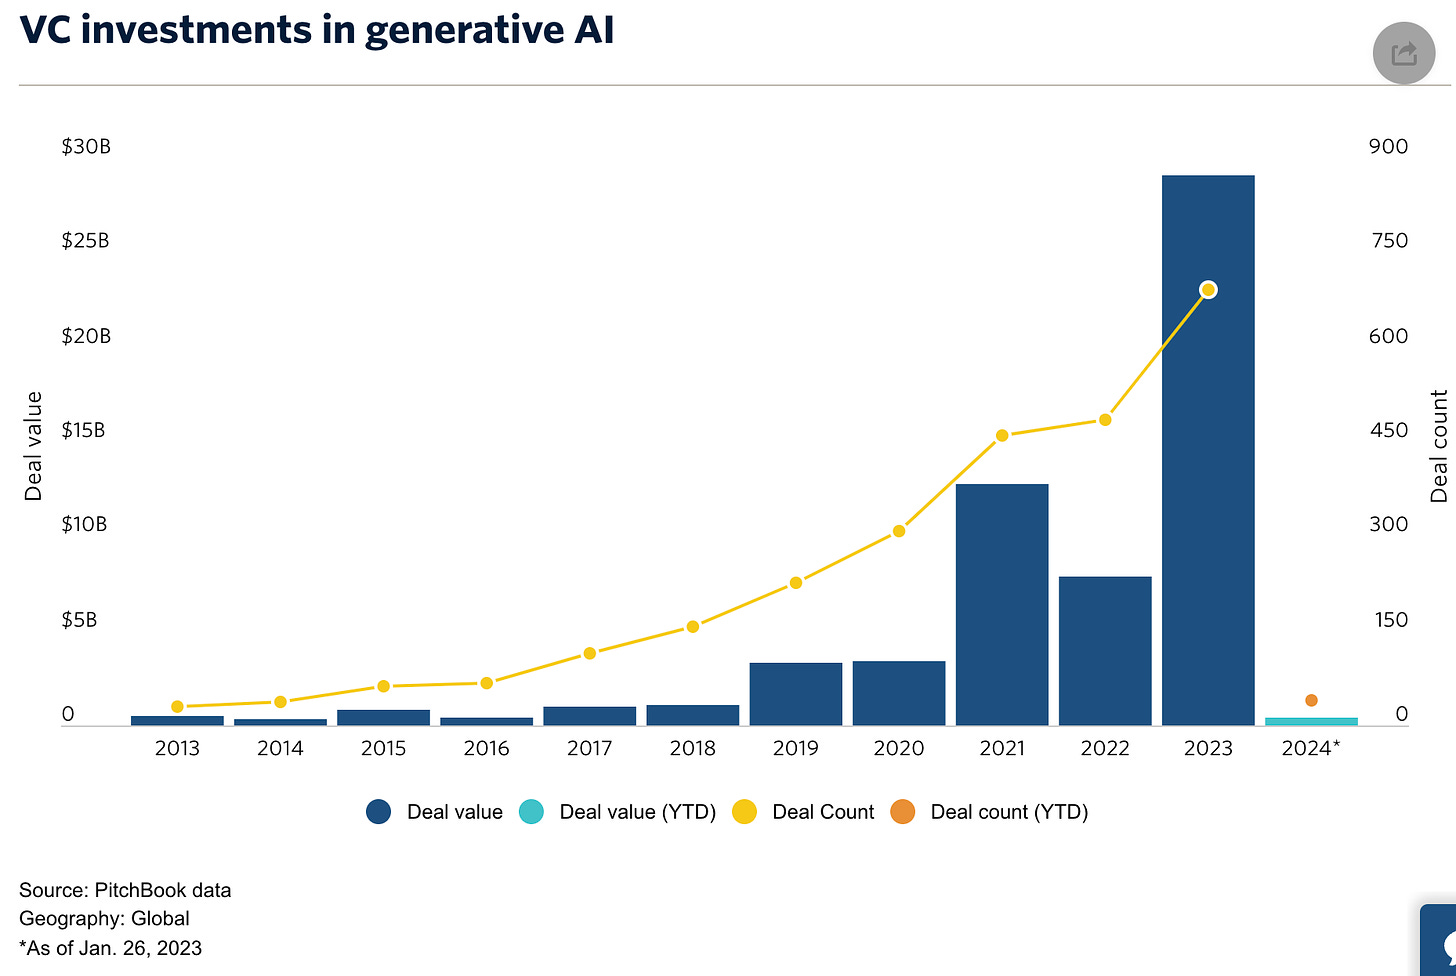 A graph showing venture capital investments in generative AI. It starts sub-$1 billion in 2018, stays low, rises to ~$3 billion in 2019 and 2020, $12 billion in 2021, drops to ~$6 billion in 2022, Athen jumps to almost $30 billion in 2023. The number of deals is overlaid and rises from near-zero in 2013 to nearly 750 in 2023. 